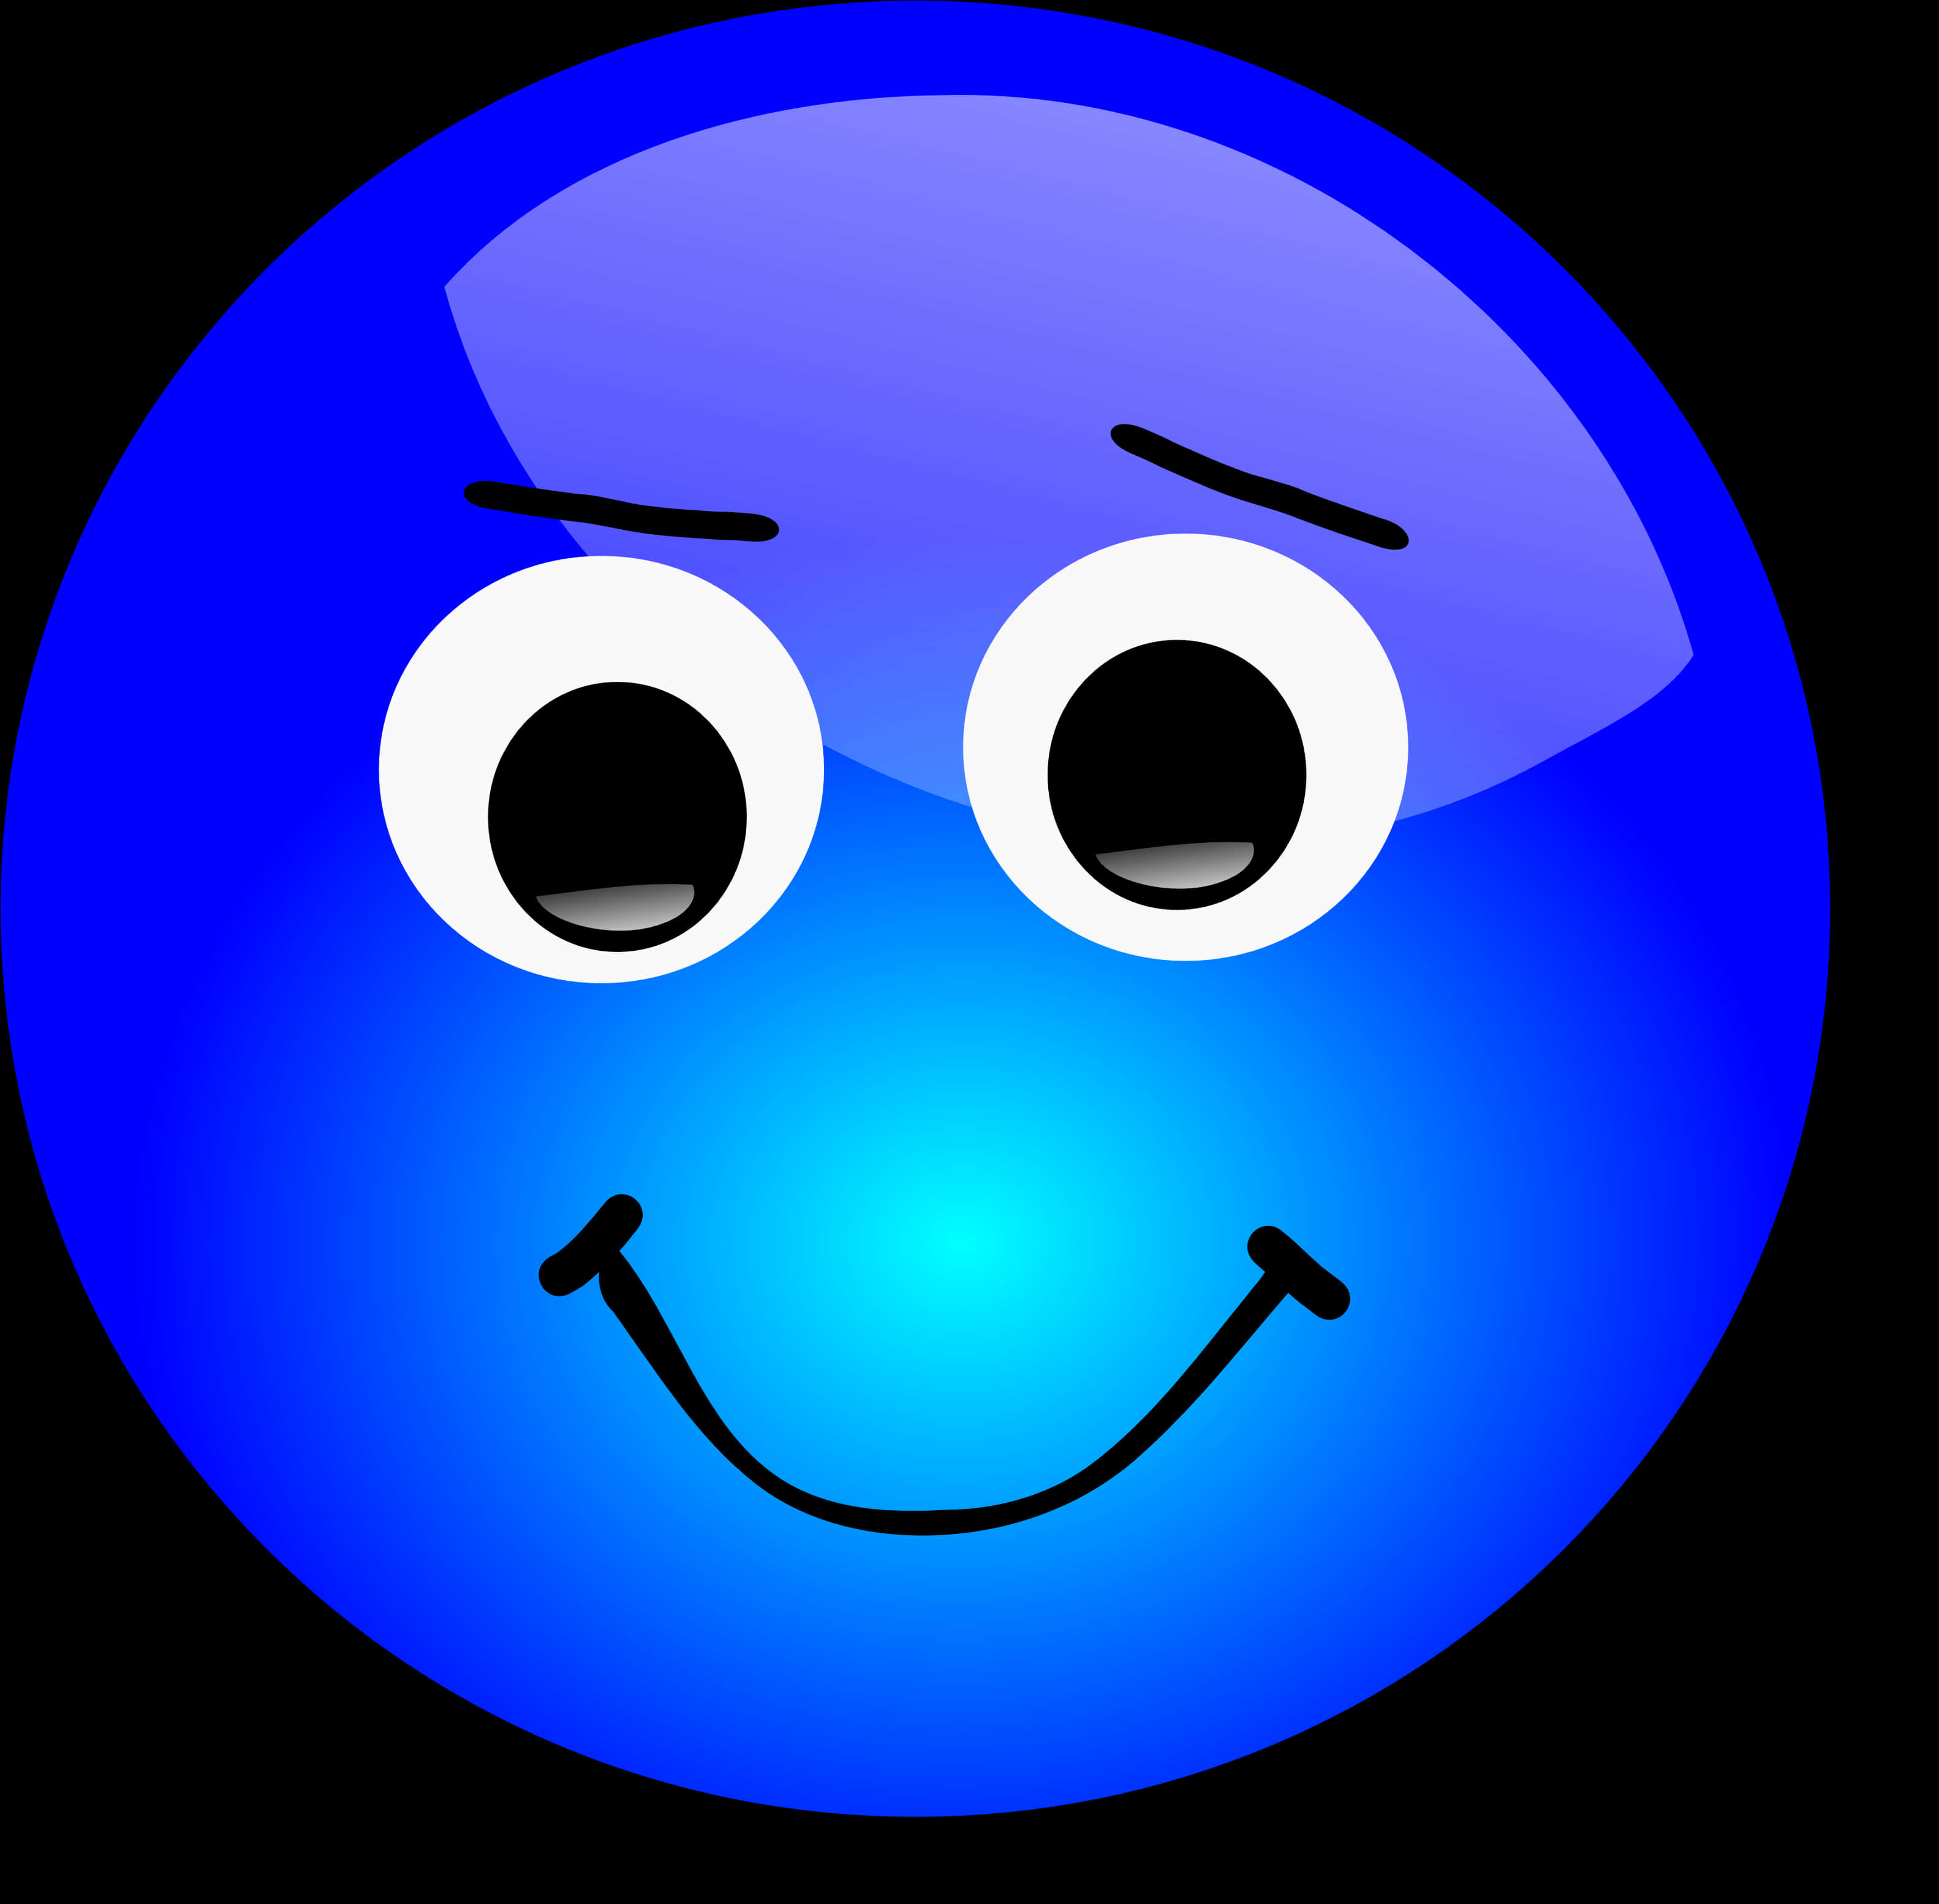 A Blue Smiley Face With Black Background